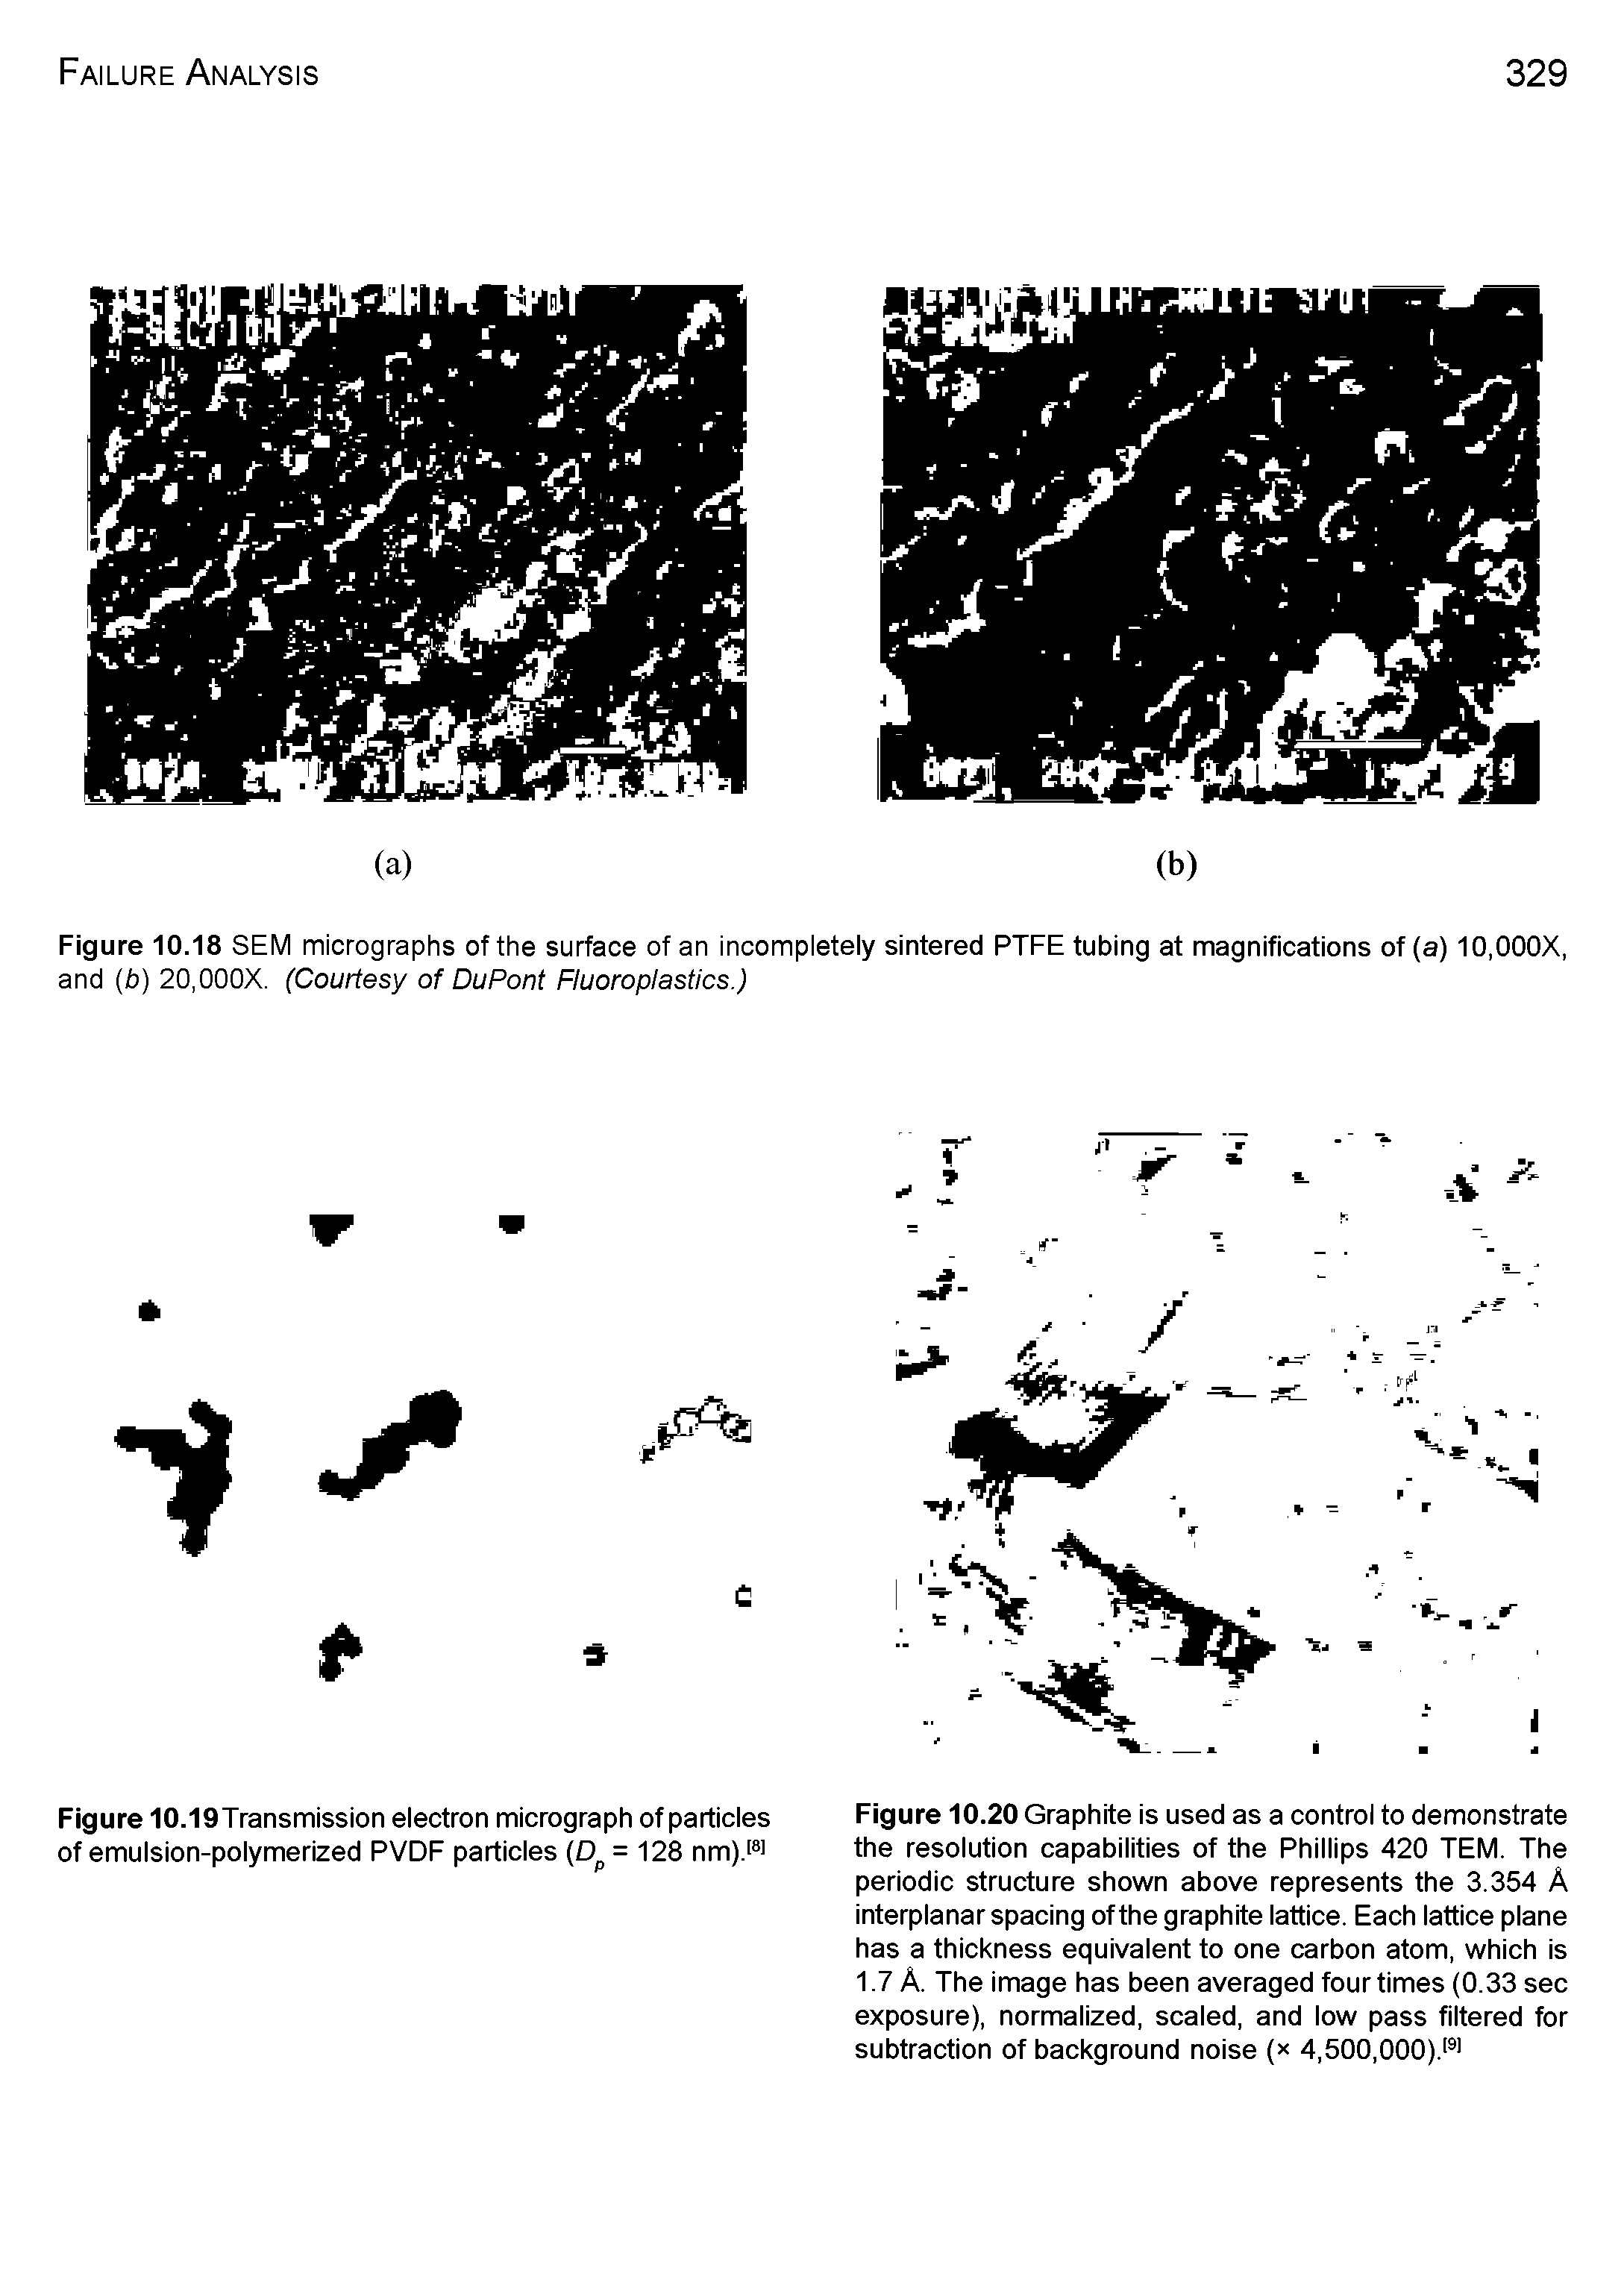 Figure 10.18 SEM micrographs of the surface of an incompletely sintered PTFE tubing at magnifications of (a) lO.OOOX, and (b) 20,000X. (Courtesy of DuPont Fluoroplastics.)...